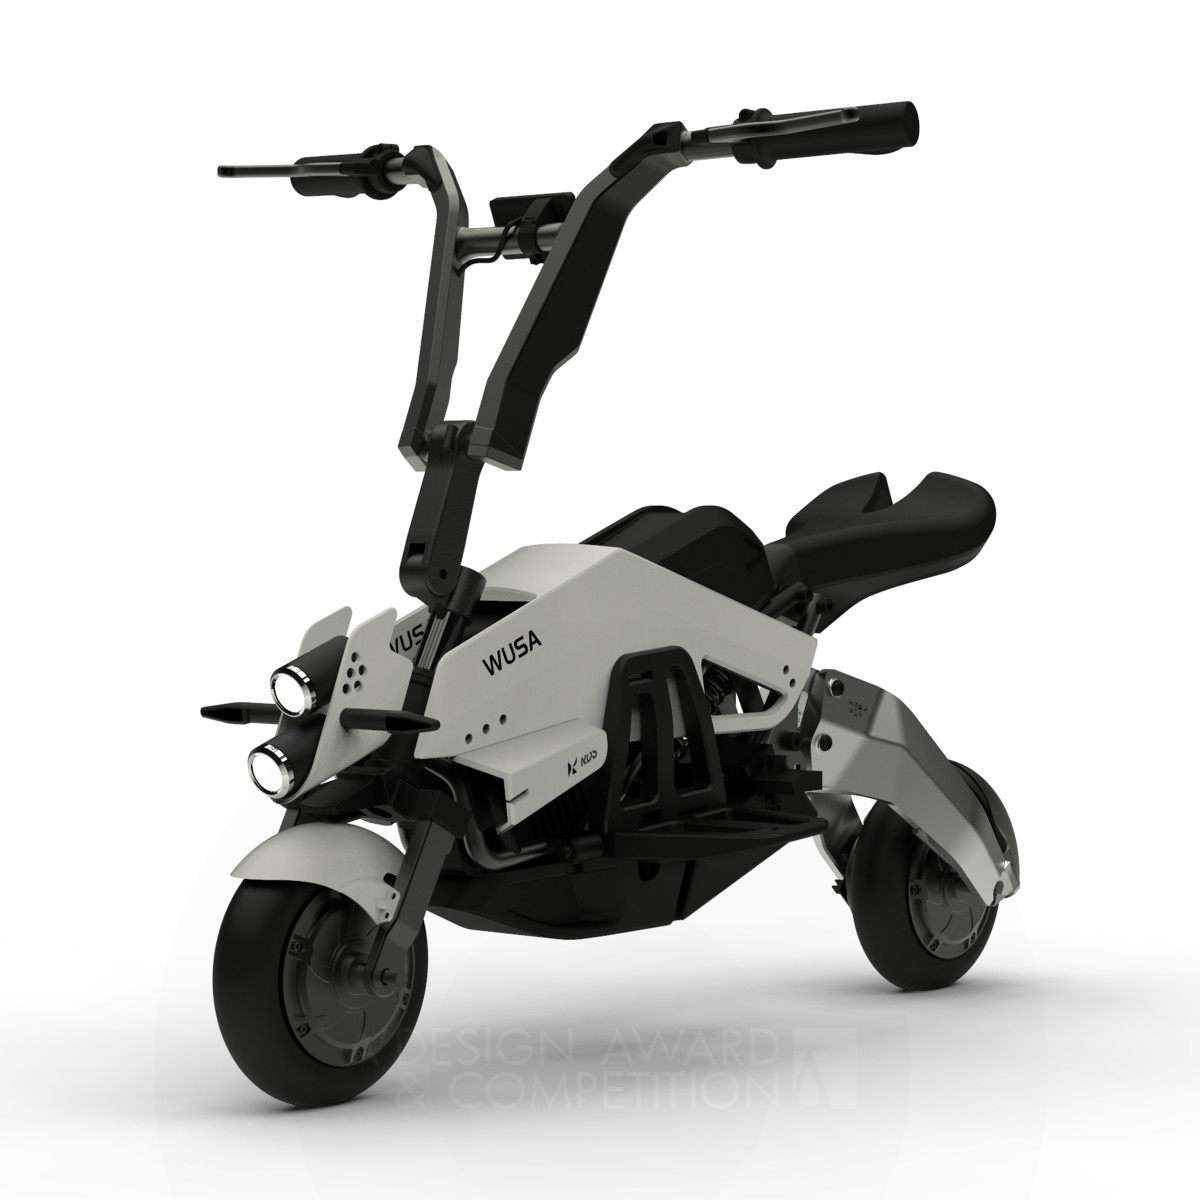 Wusa: Redefining Electric Personal Mobility